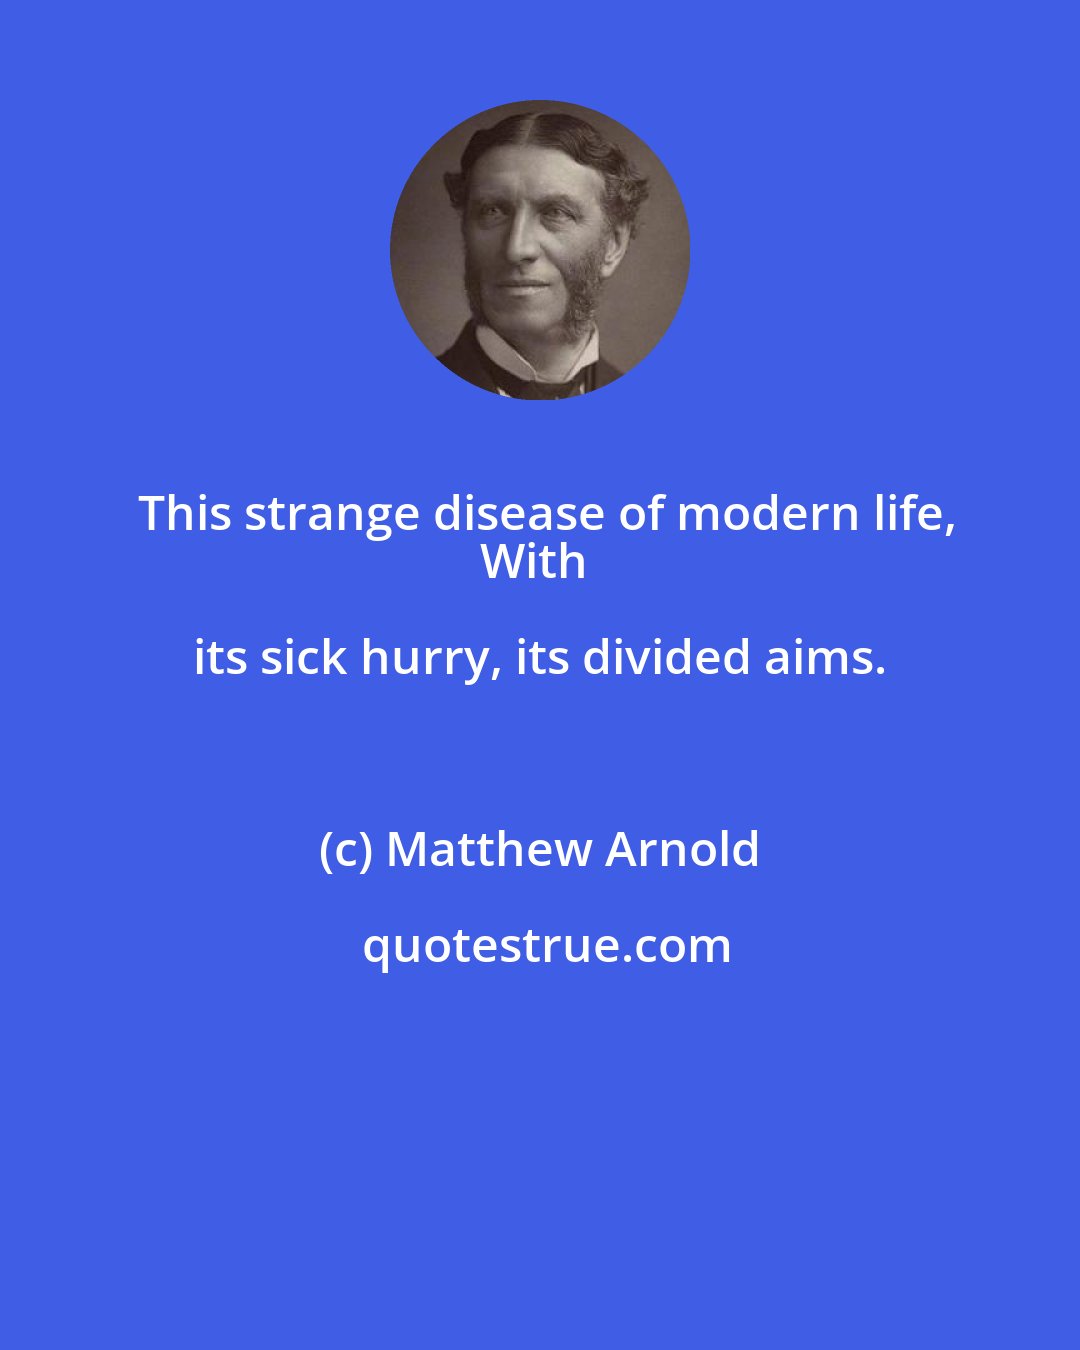 Matthew Arnold: This strange disease of modern life,
With its sick hurry, its divided aims.